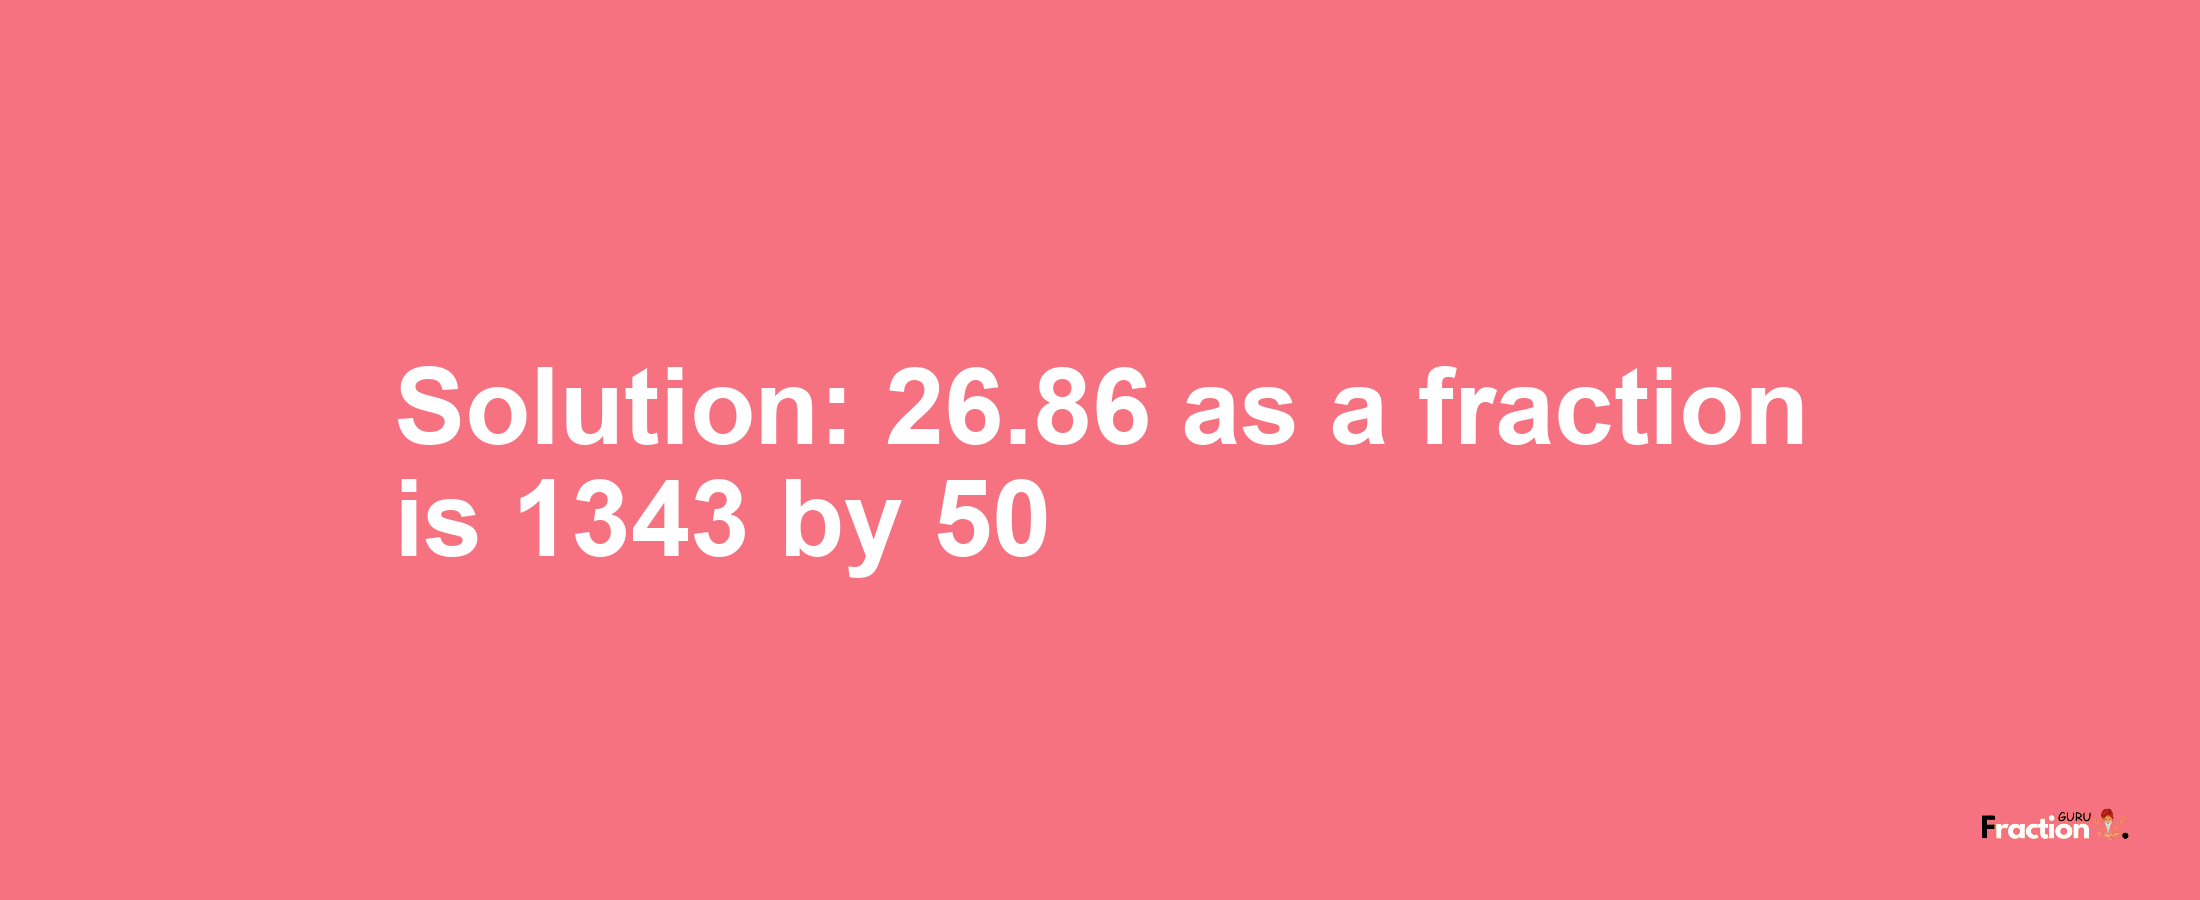 Solution:26.86 as a fraction is 1343/50